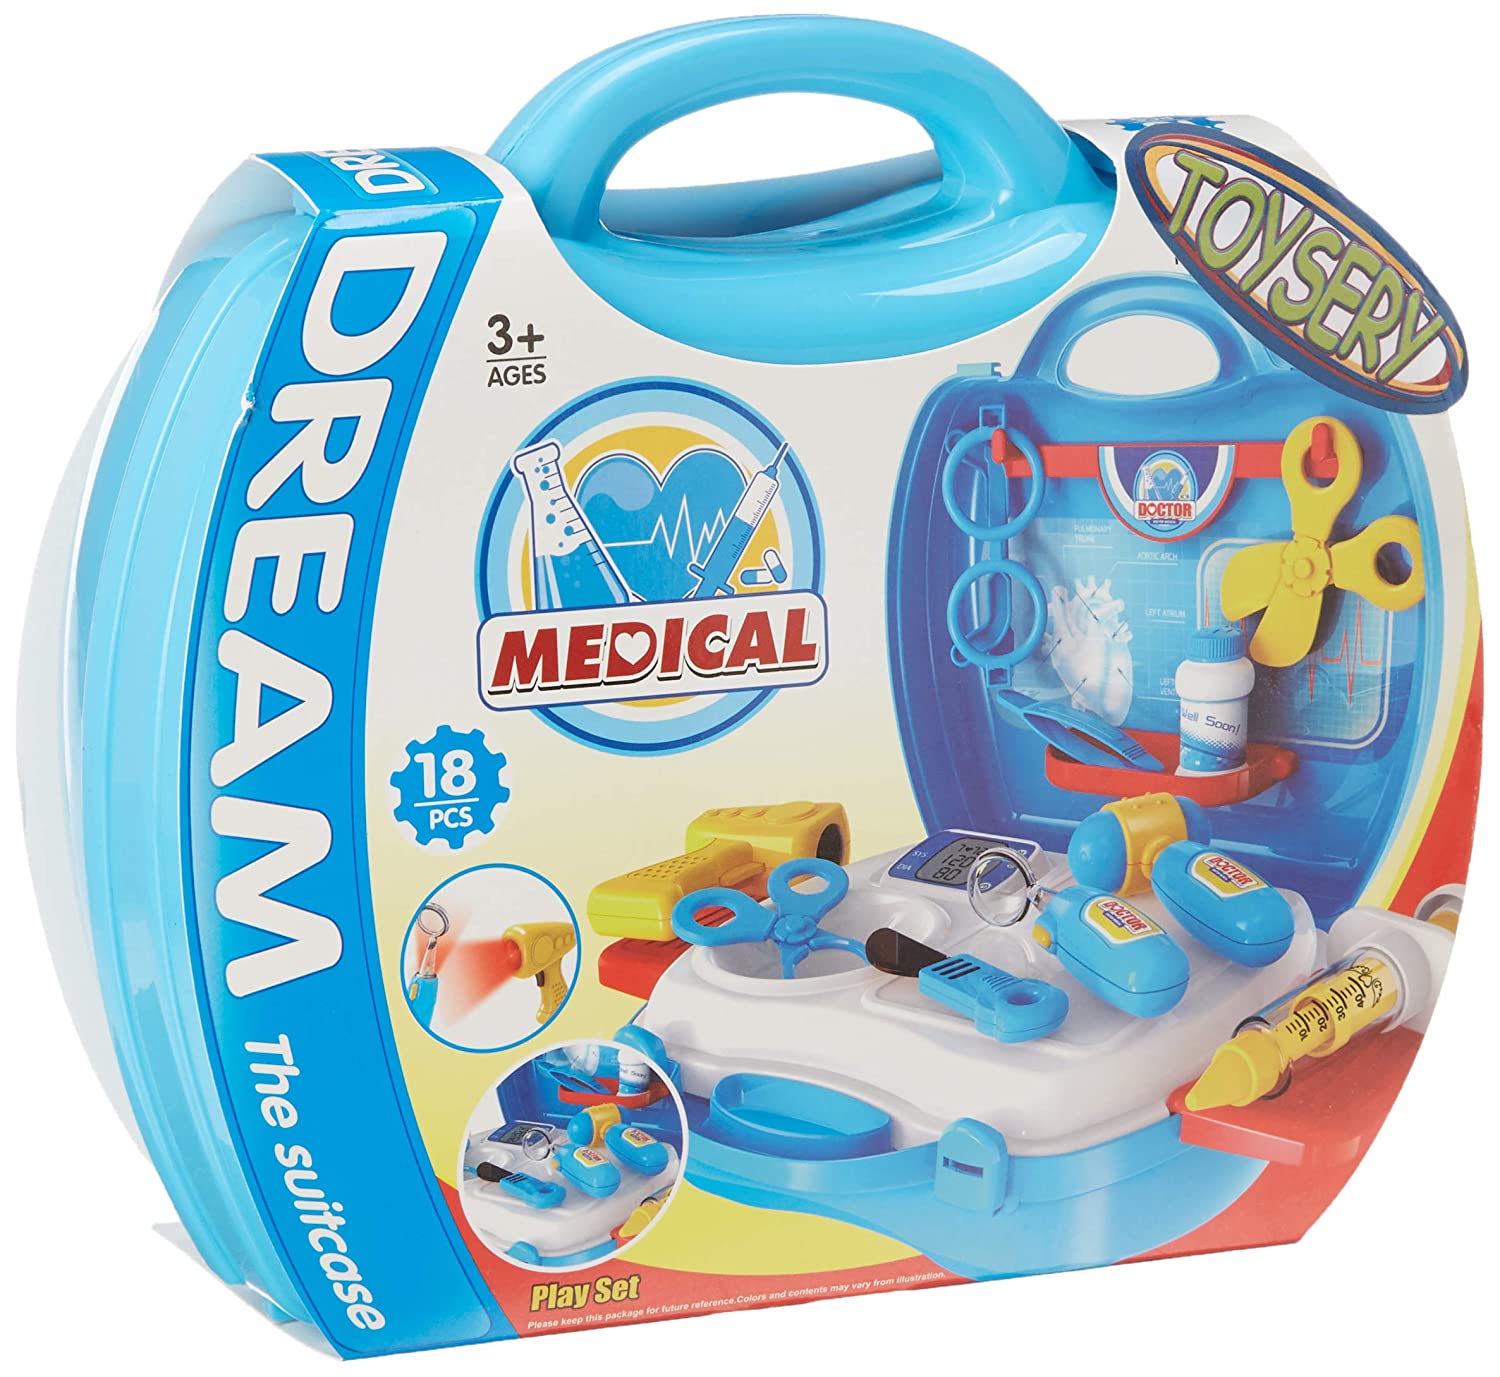 Top 9 Best Toy Doctor Kits Reviews in 2023 8